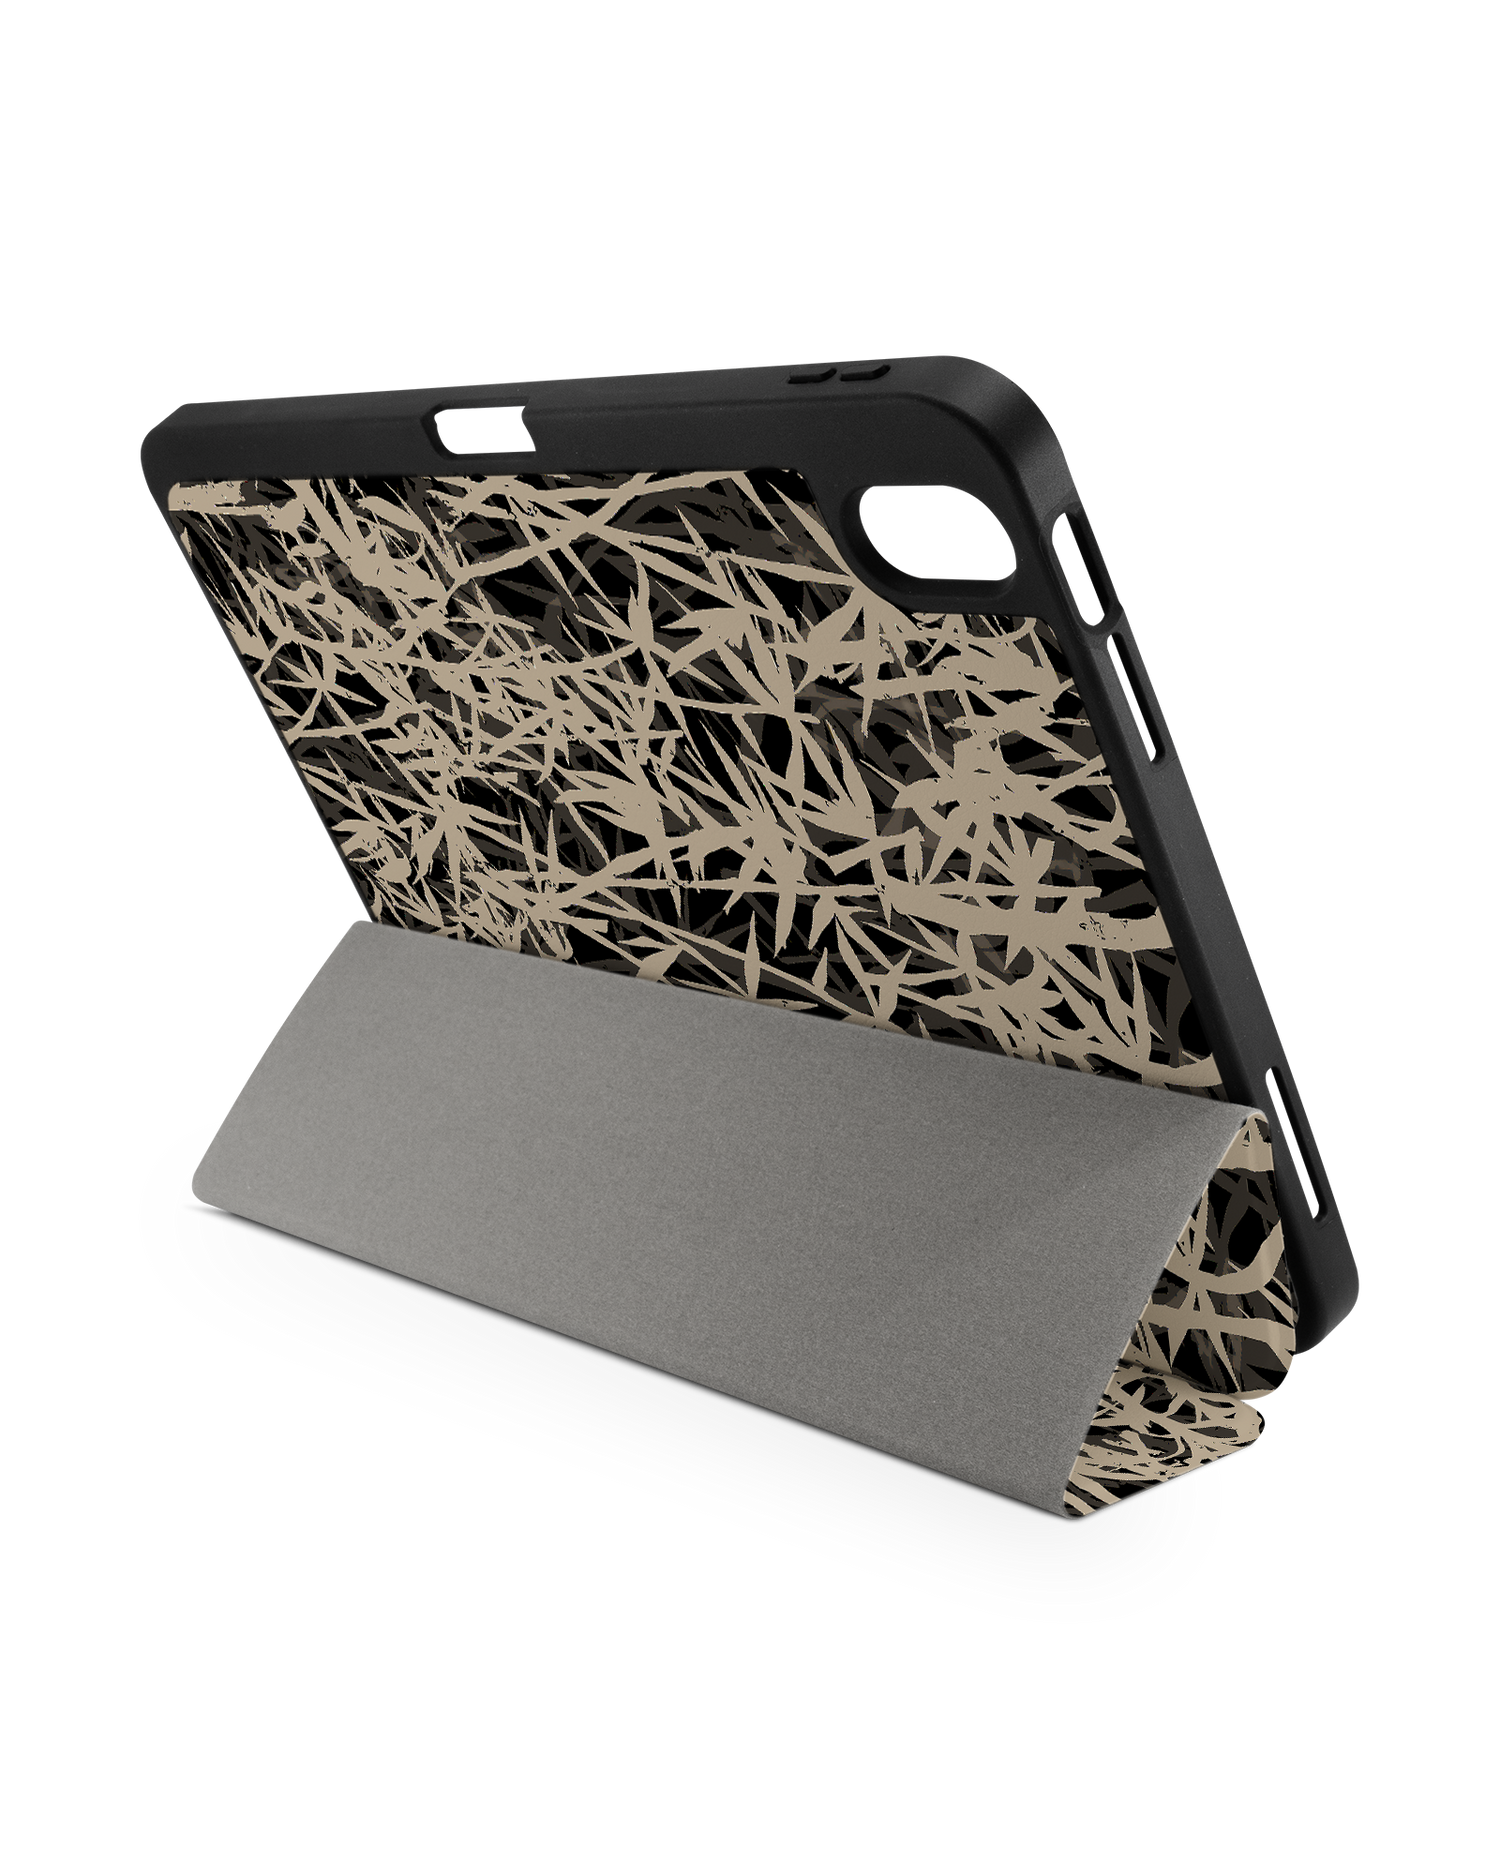 Bamboo Pattern iPad Case with Pencil Holder for Apple iPad (10th Generation): Set up in landscape format (back view)